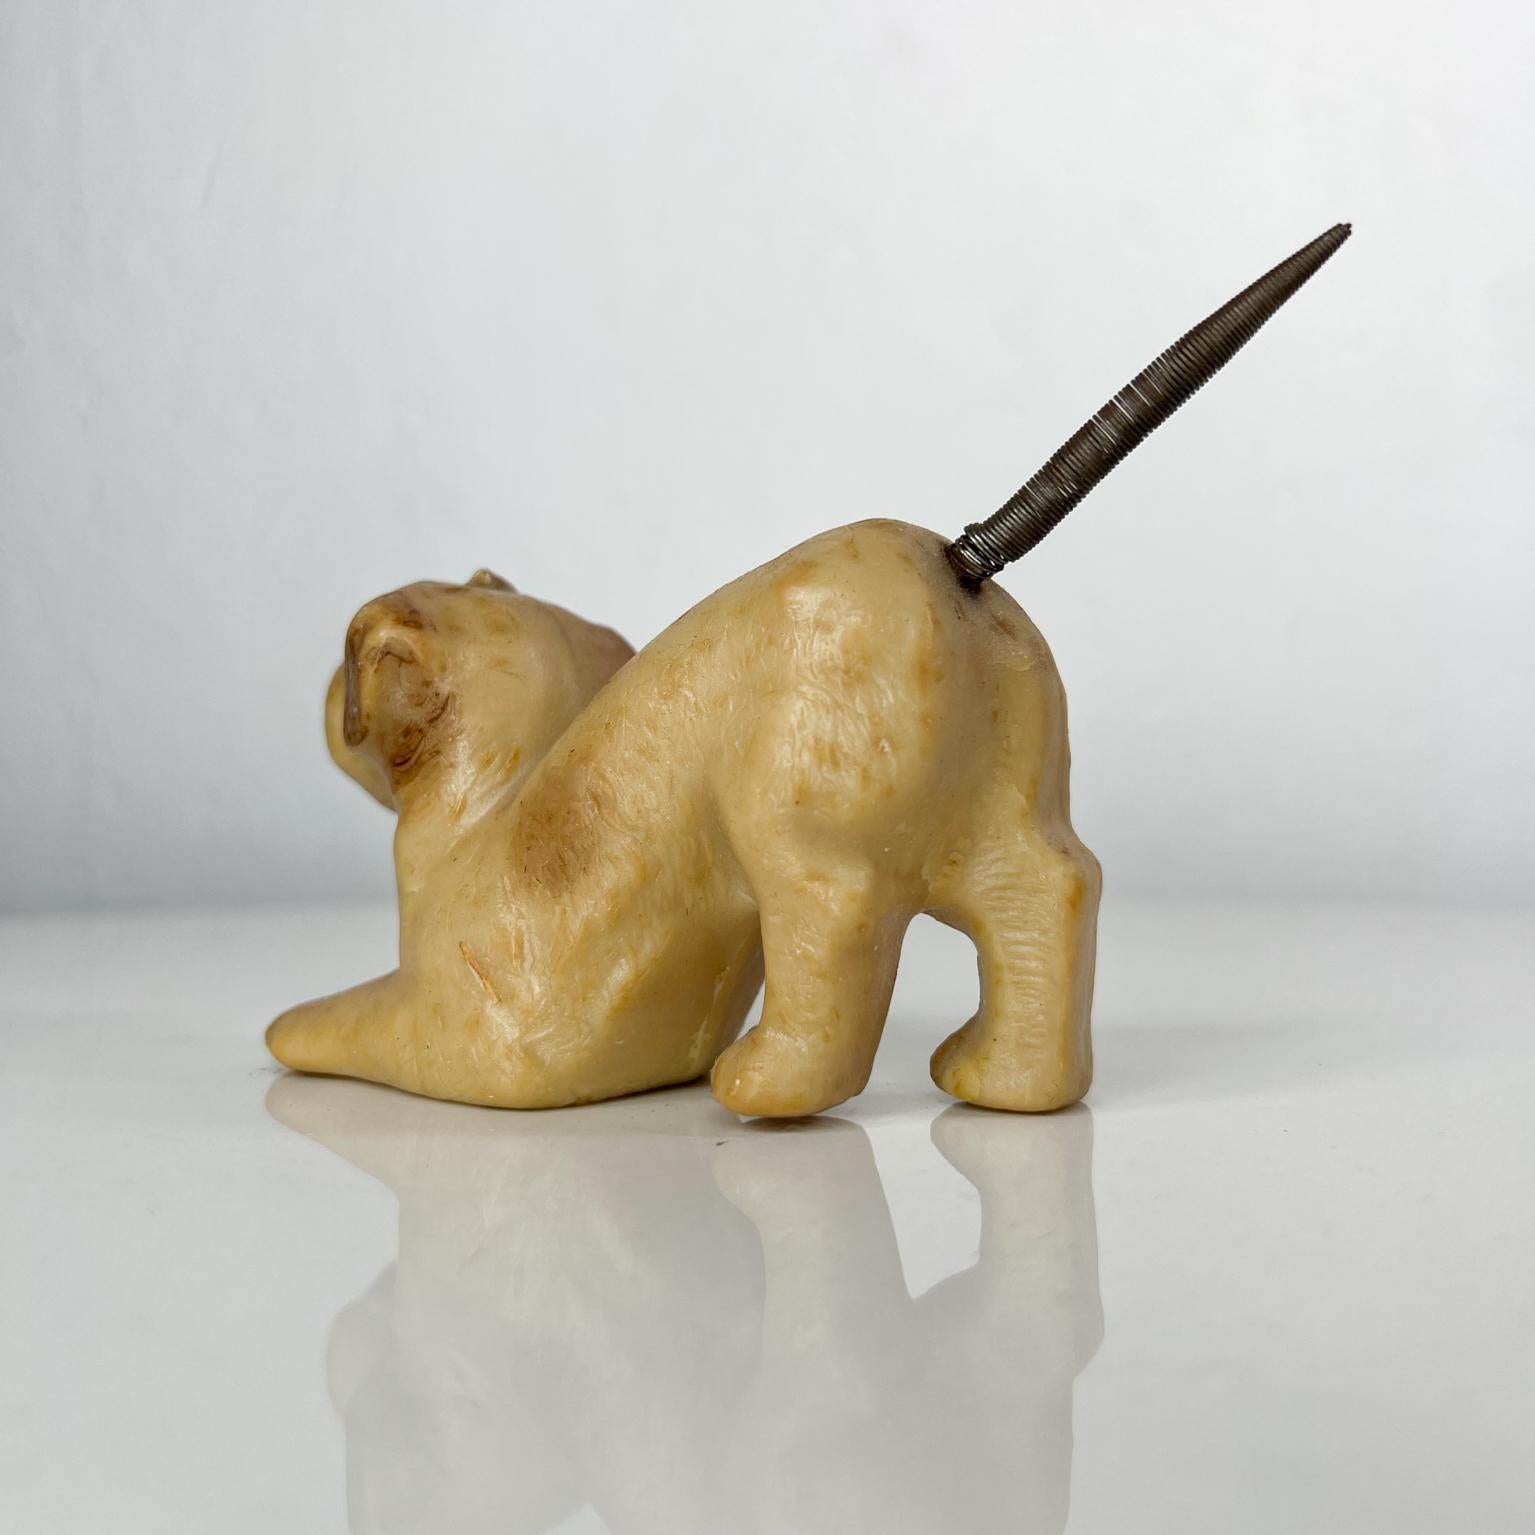 soap carving dog